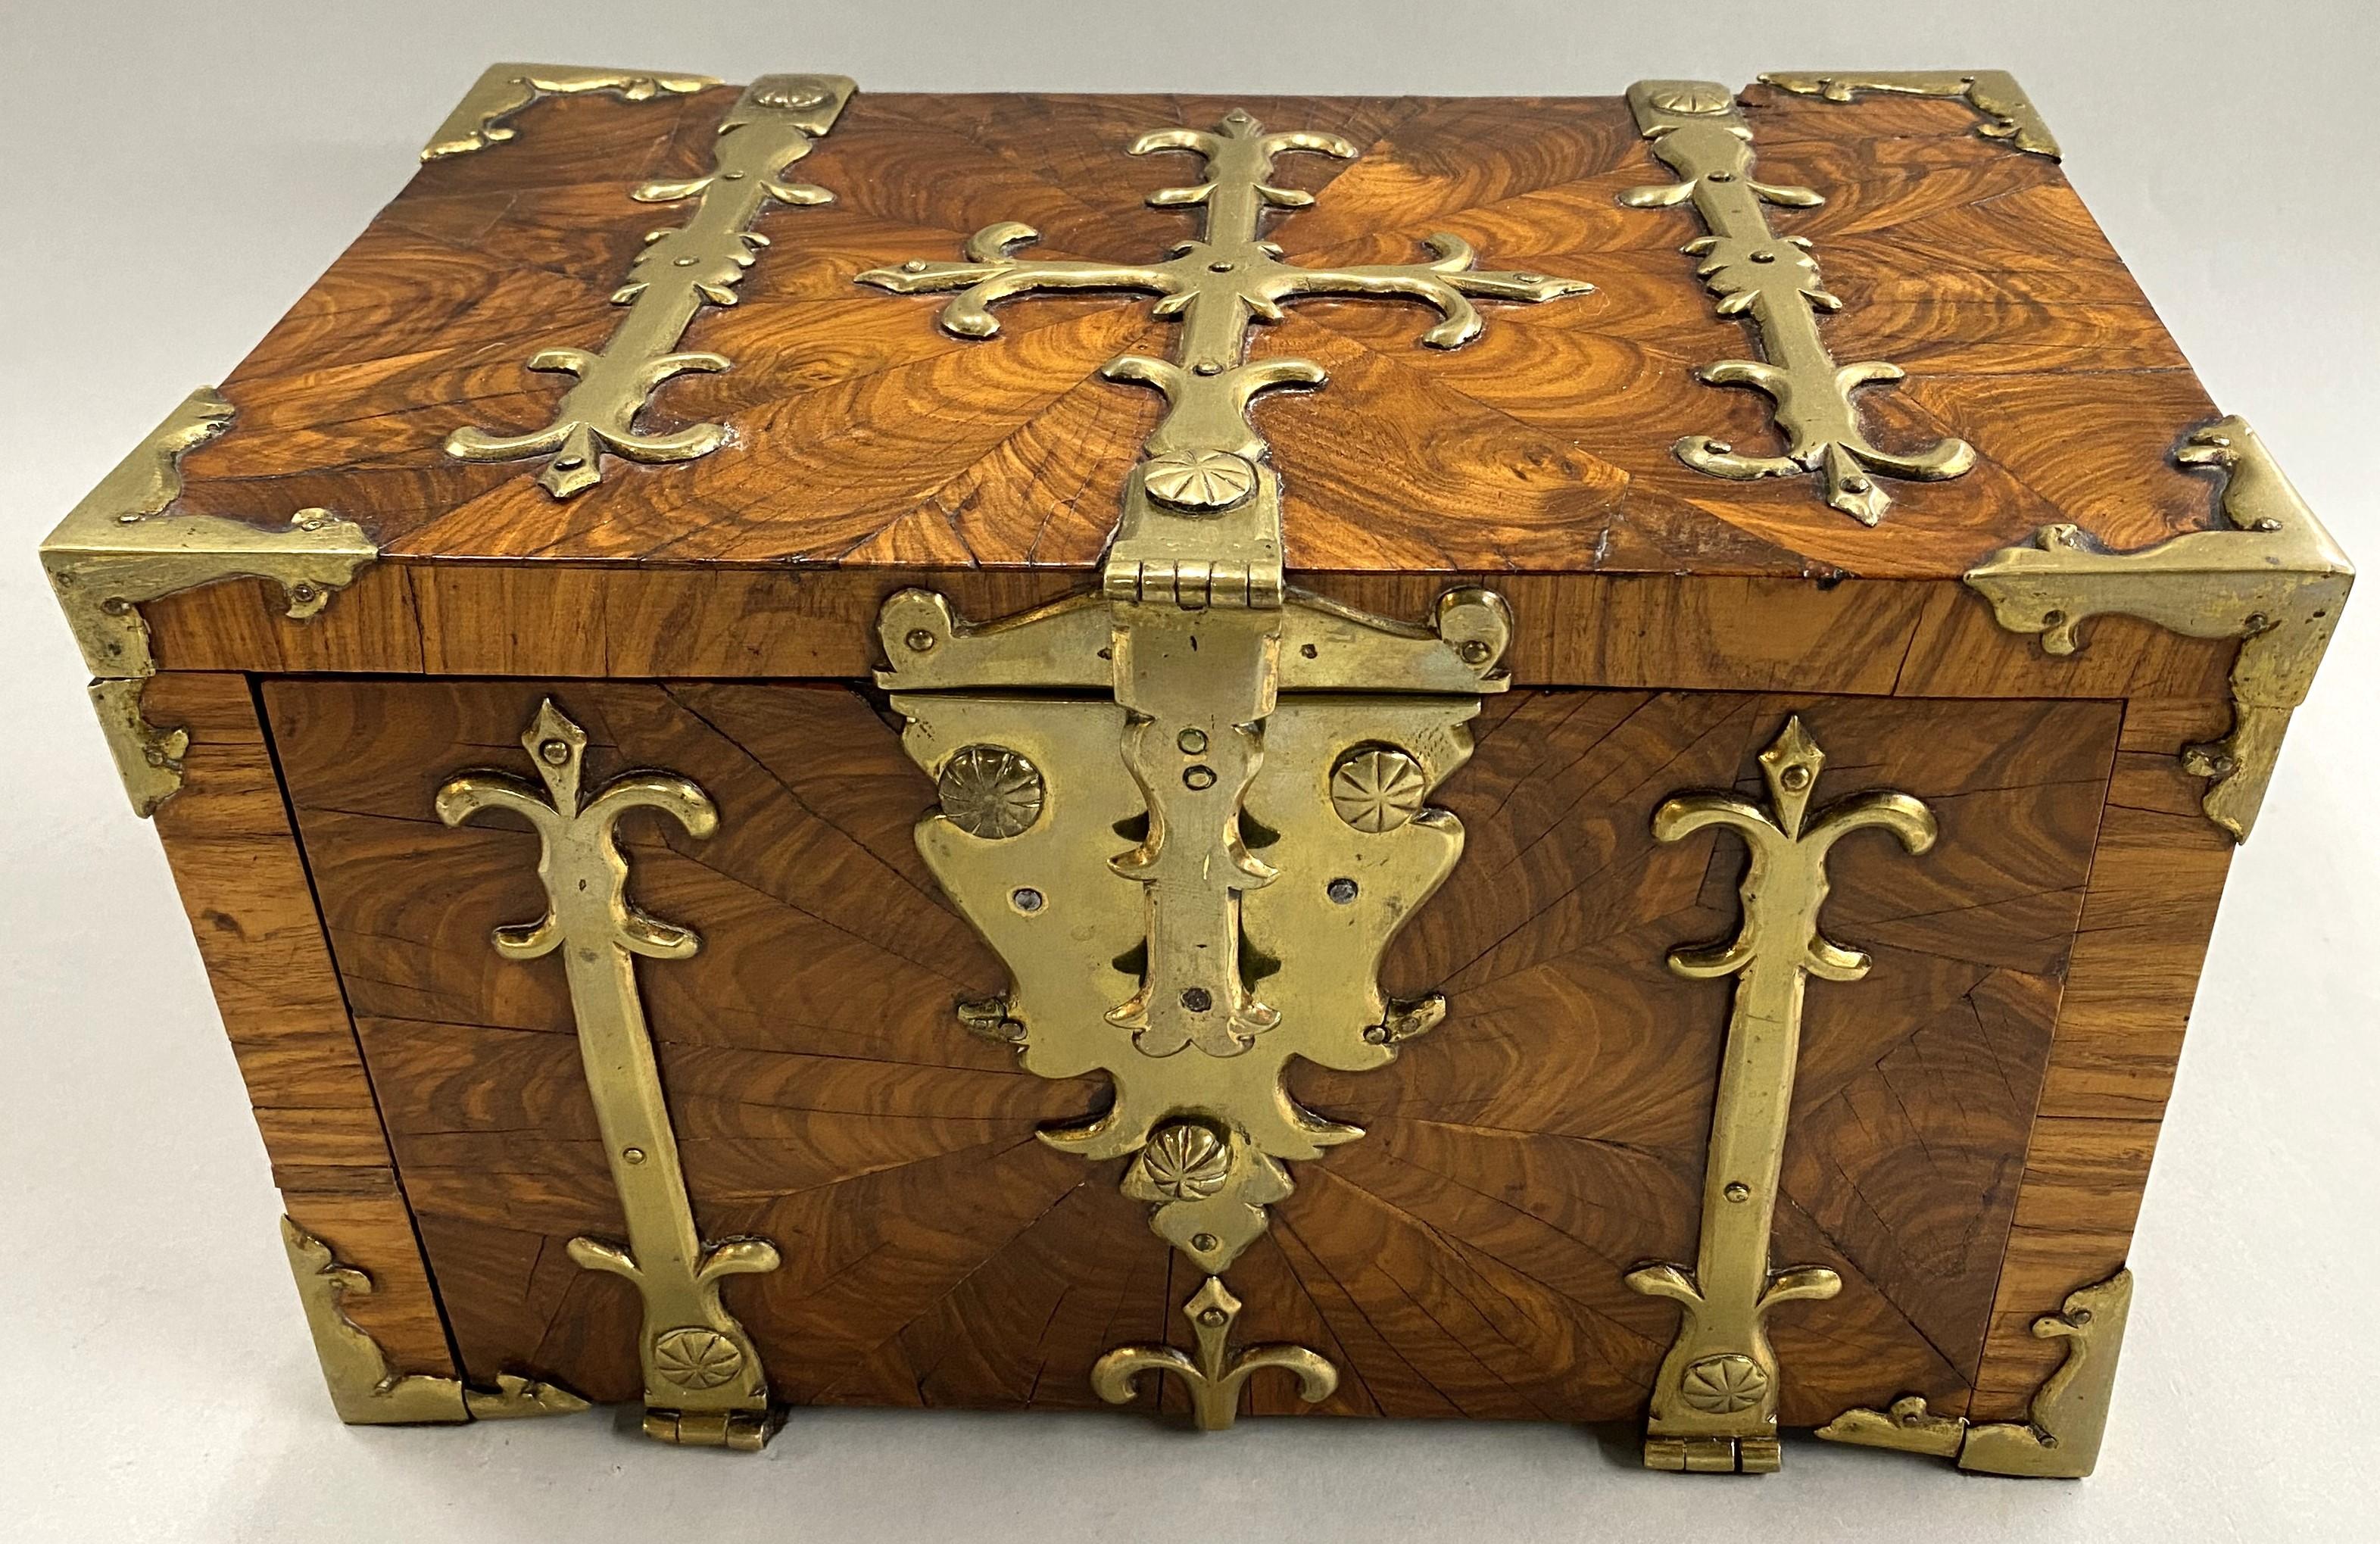 A rare English coffre fort or strong box of princeswood (later known as kingwood) with brass strapping and side handles. The front opens to reveal one hidden drawer. The lock and key are original, as well as all the brass on the box. Dates to circa